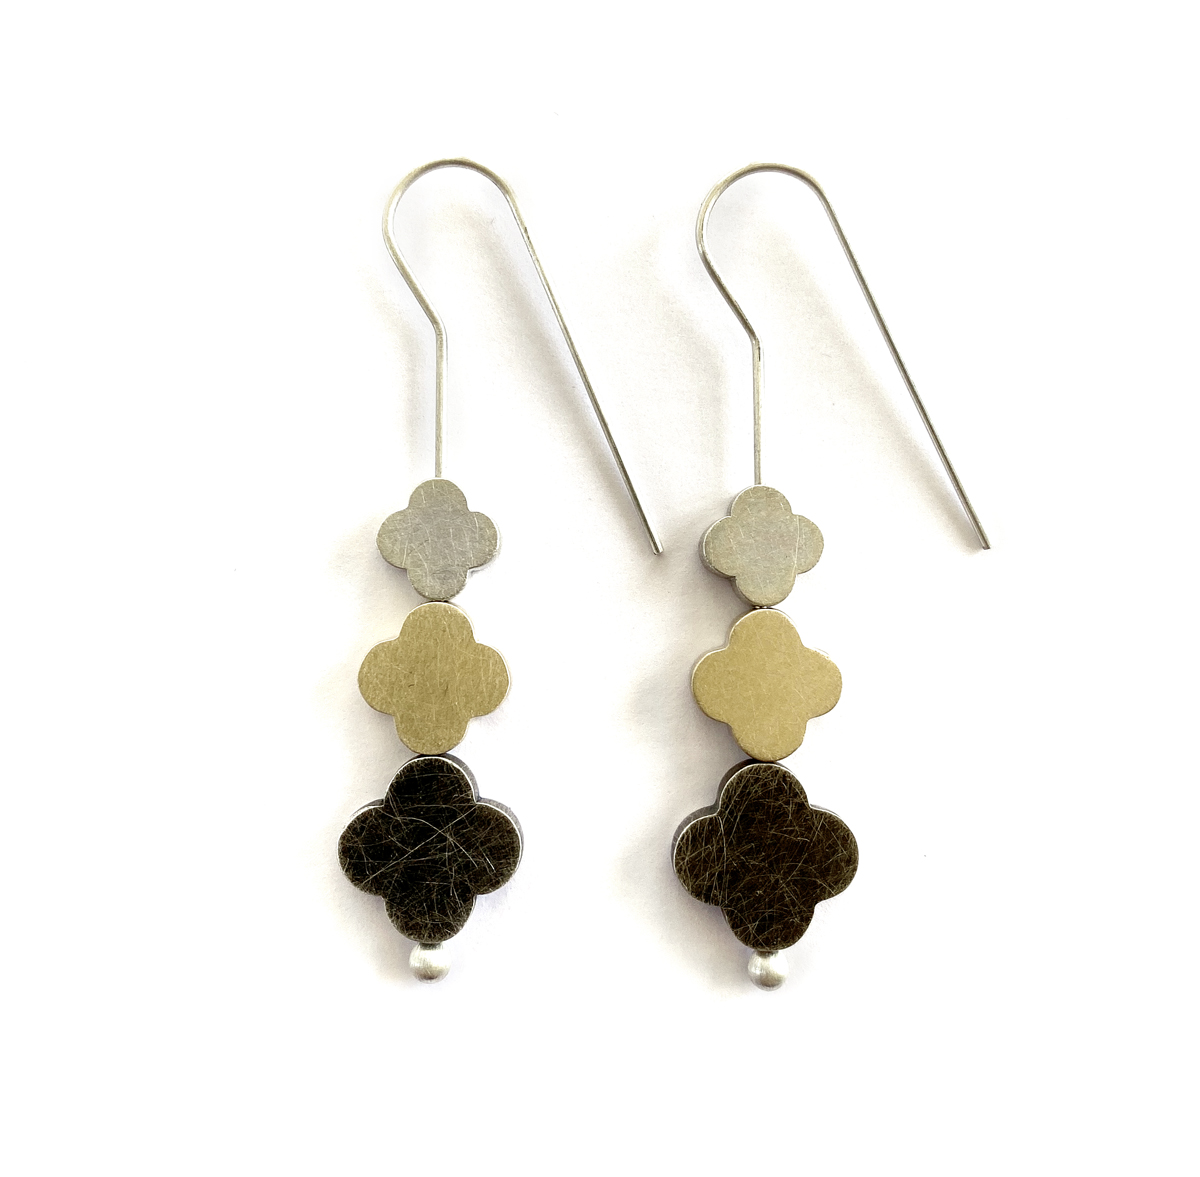 Turning Seasons Trio Earrings, sterling silver, 9ct gold, 2020, Kate Alterio